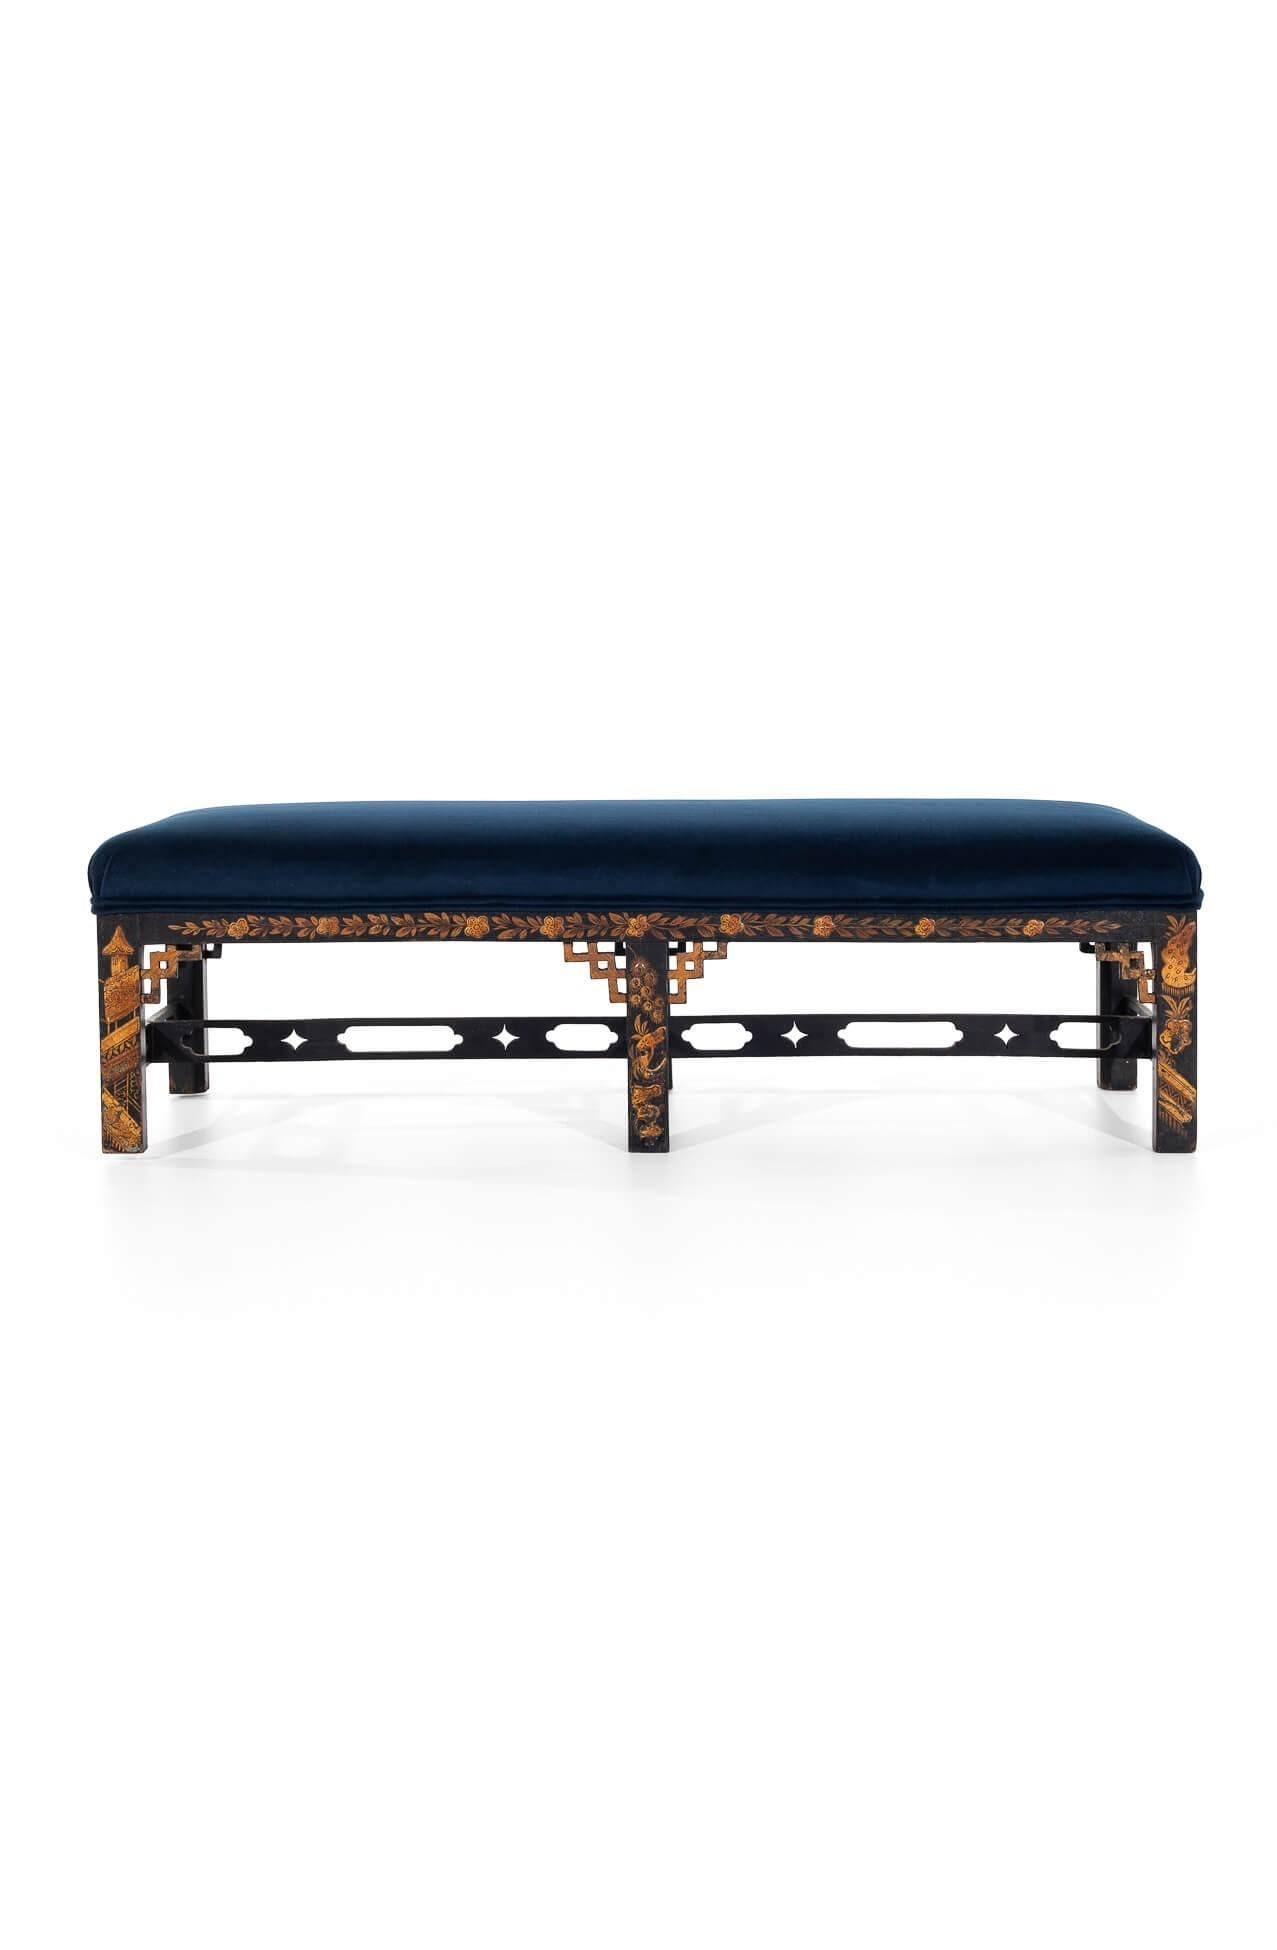 A low chinoiserie footstool with intricate hand-painted scenes from rural East Asia,  the decorative arts theatre, and music.

The ebonised beech frame stands on six block legs united by three central ornate stretchers.

Fully reupholstered with